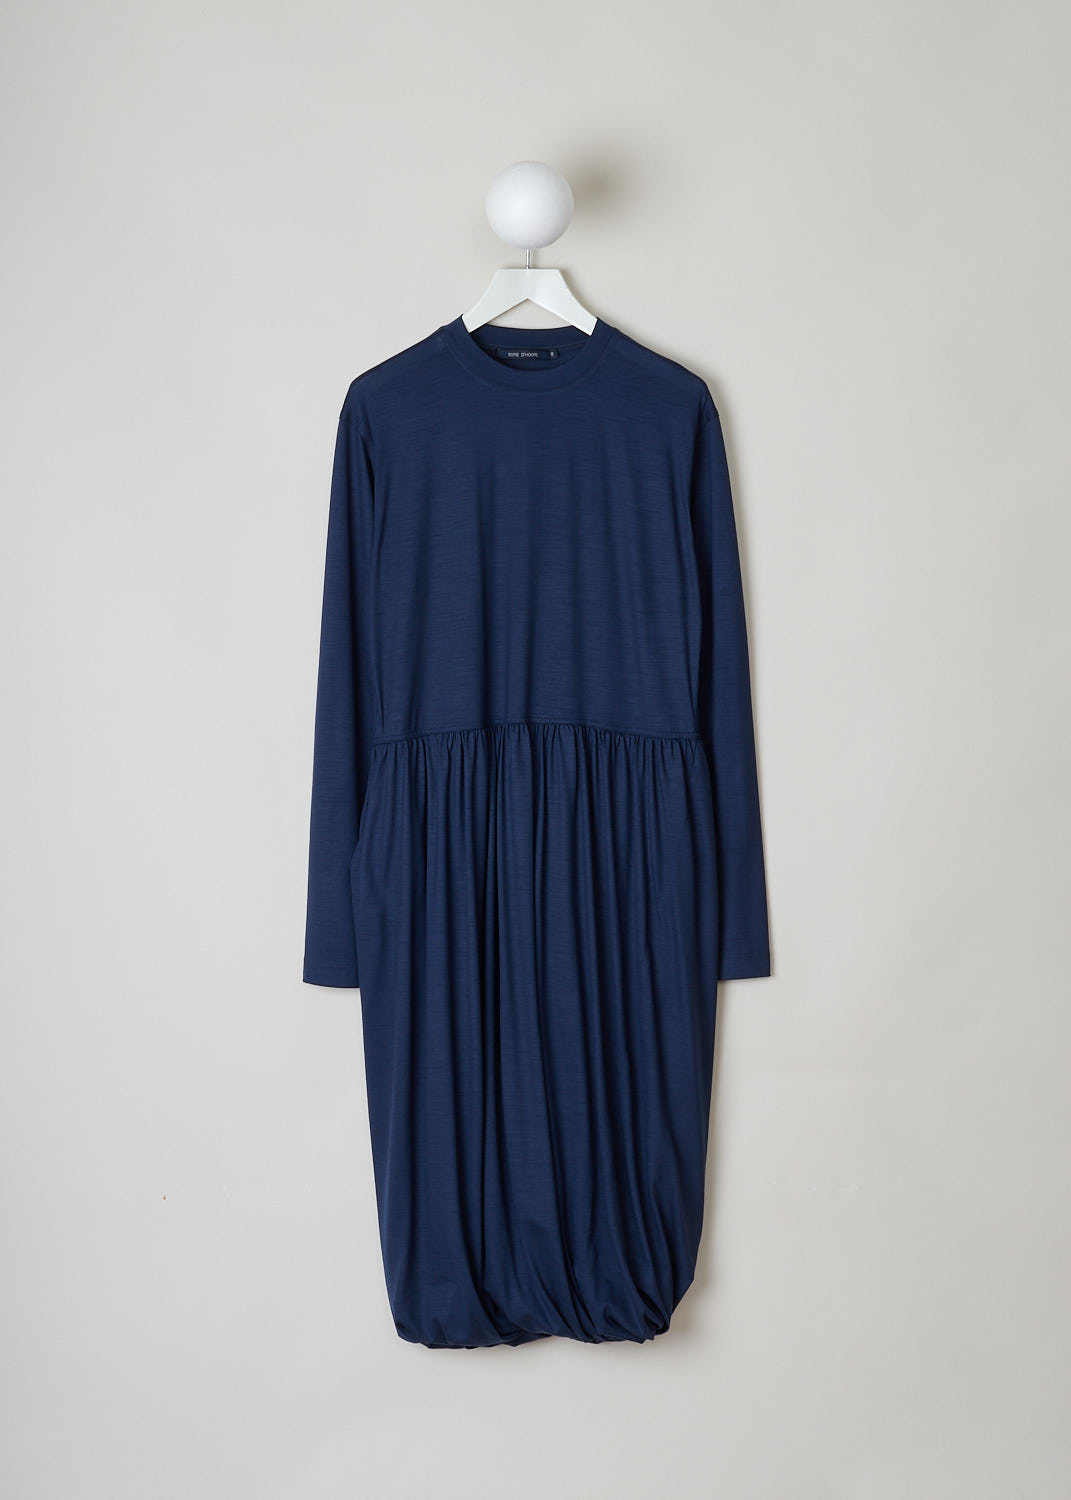 SOFIE Dâ€™HOORE, NAVY BLUE LONG SLEEVE DRESS, DEMURE_WOJE_NAVY, Blue, Front, This navy blue mid-length dress features a round neckline, a plain long sleeve bodice and a twisted balloon skirt. A single side pocket can be found concealed in the seam. 
